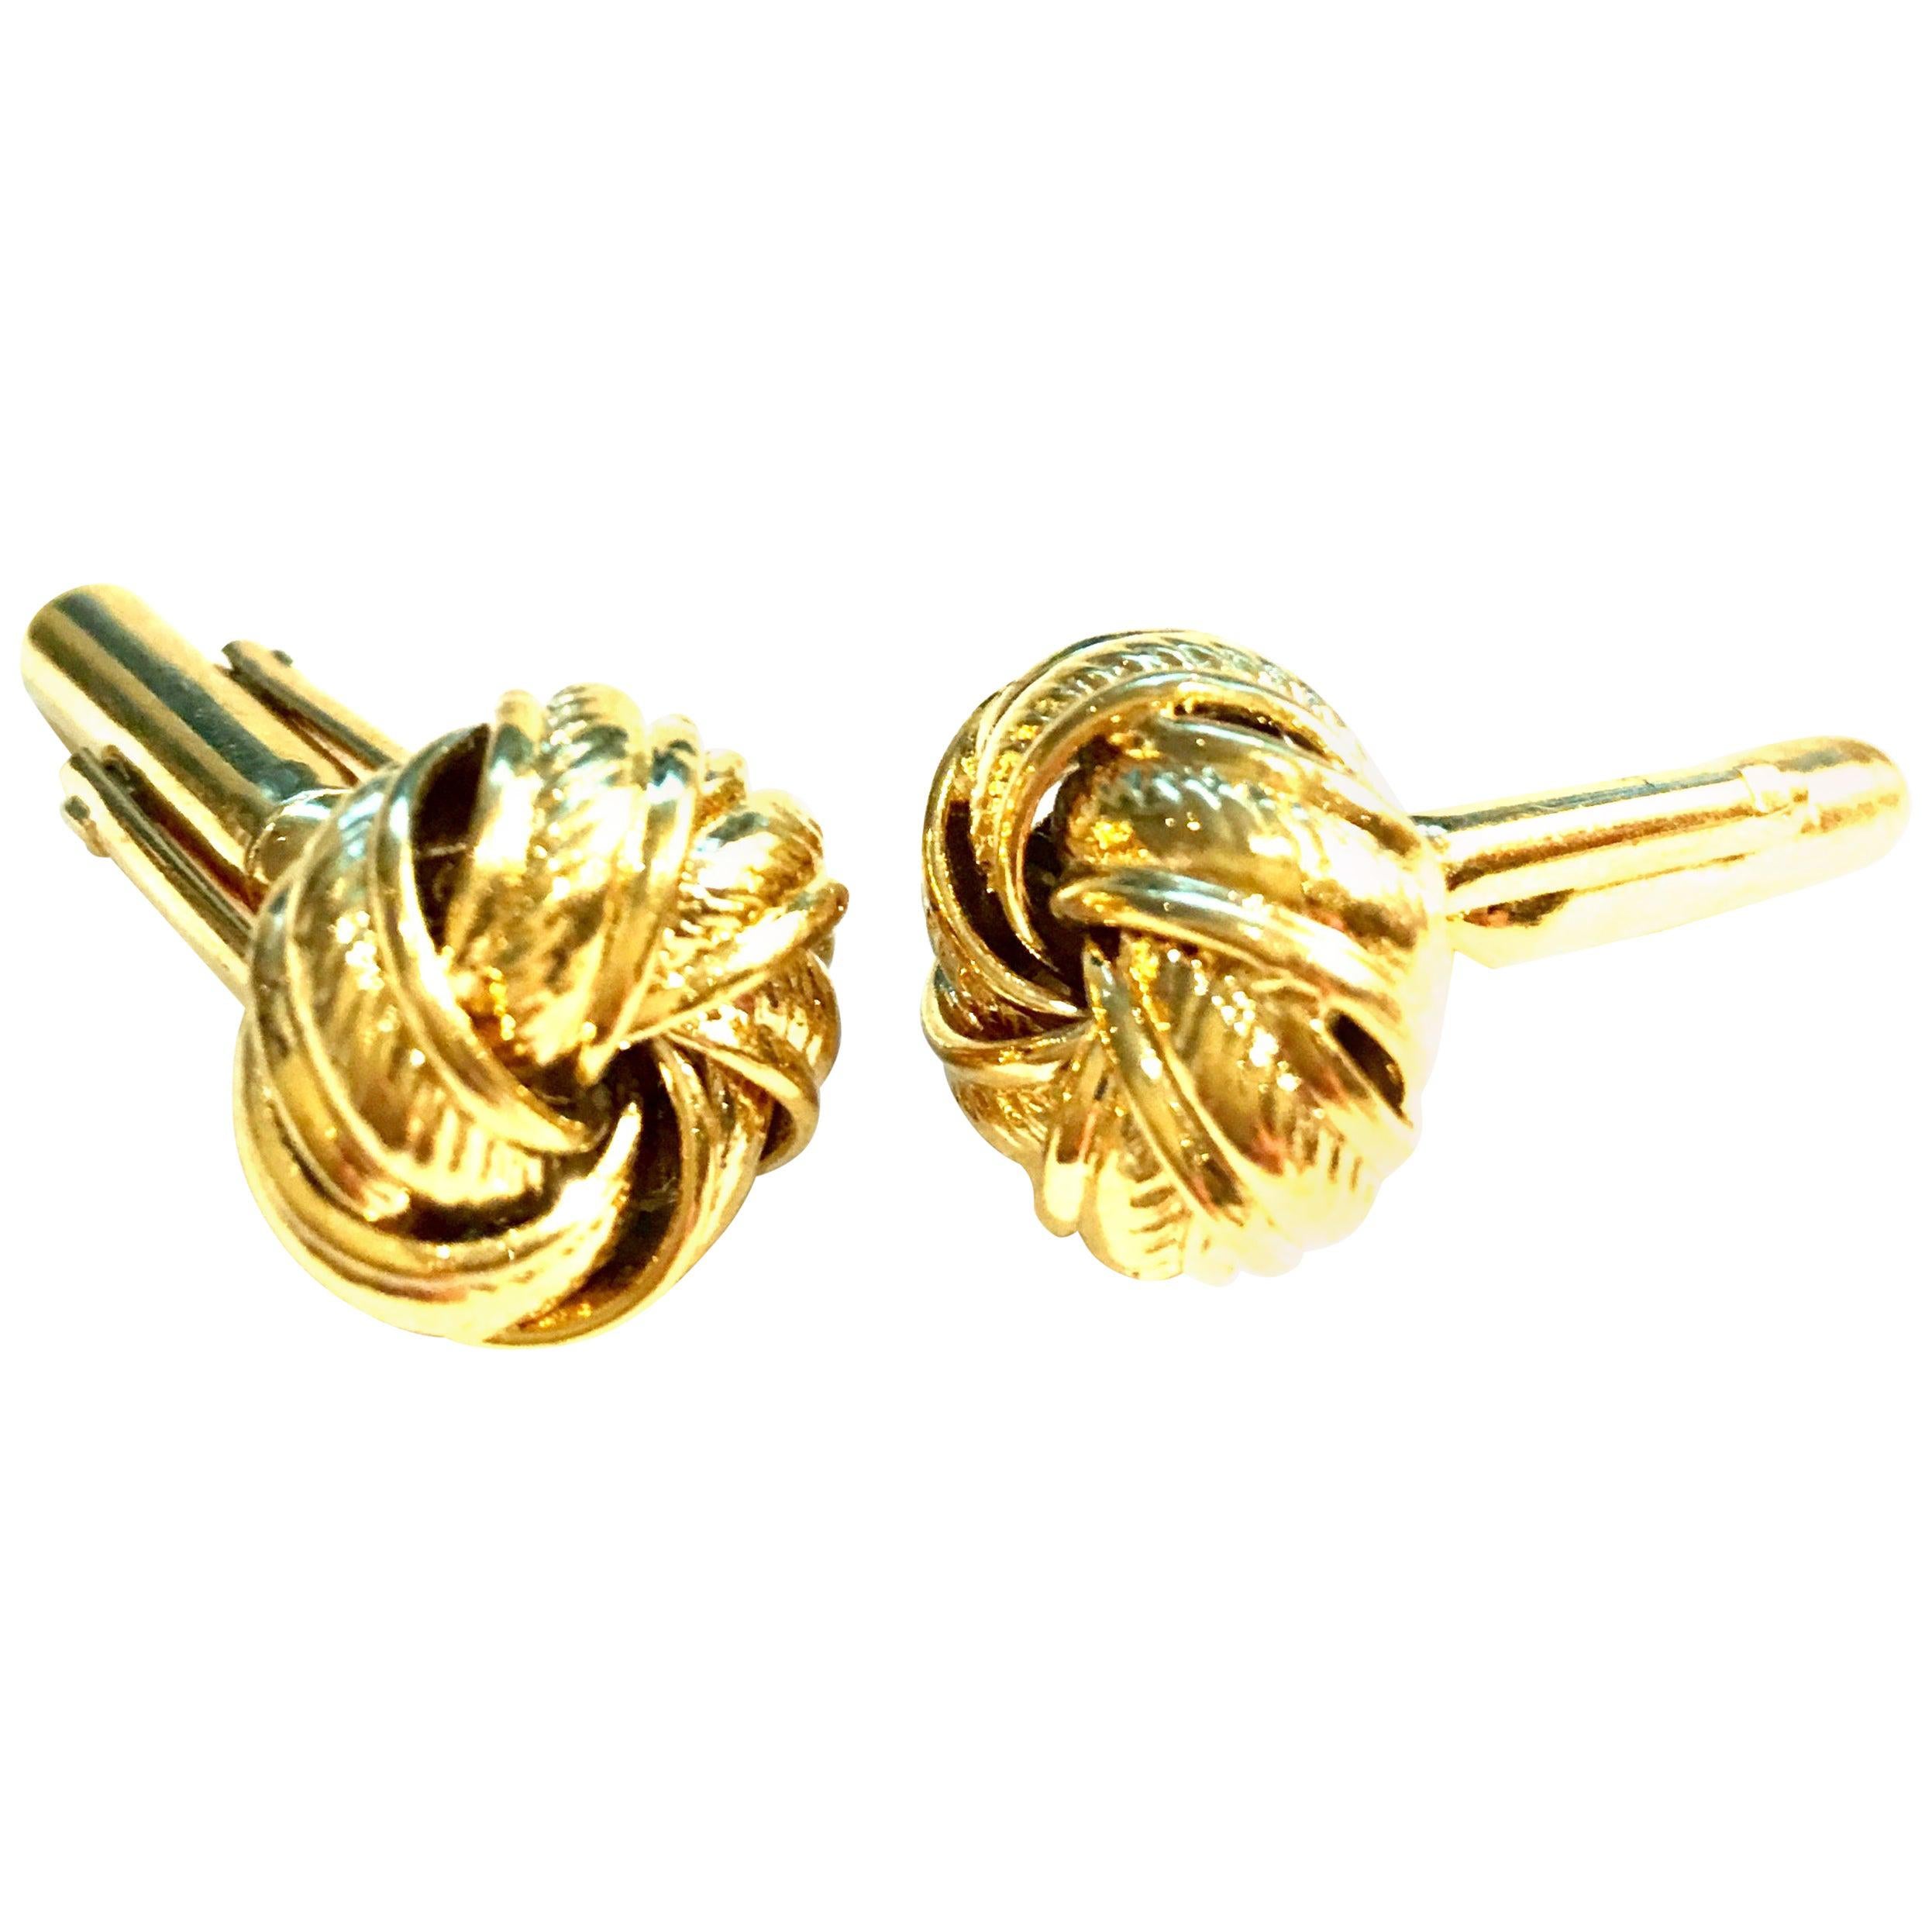 Pair of Early 20th Century Gold Novelty Cufflinks For Sale at 1stDibs